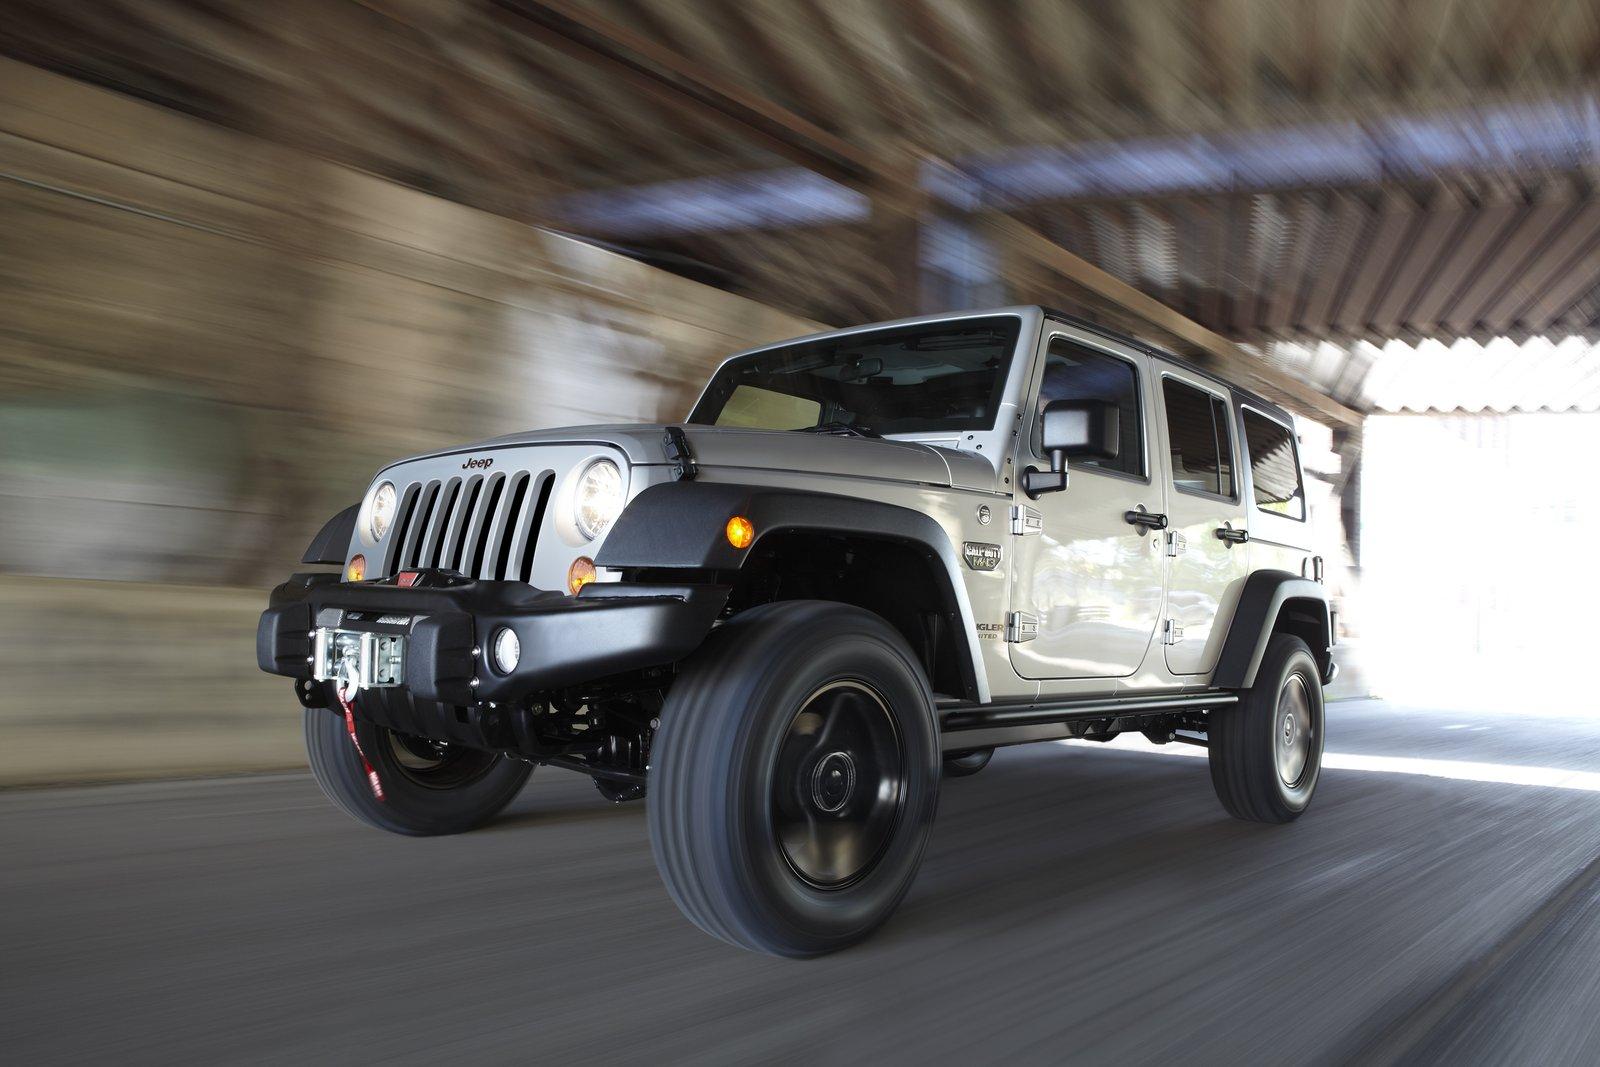 Jeep Wrangler Call of Duty MW3 Special Edition